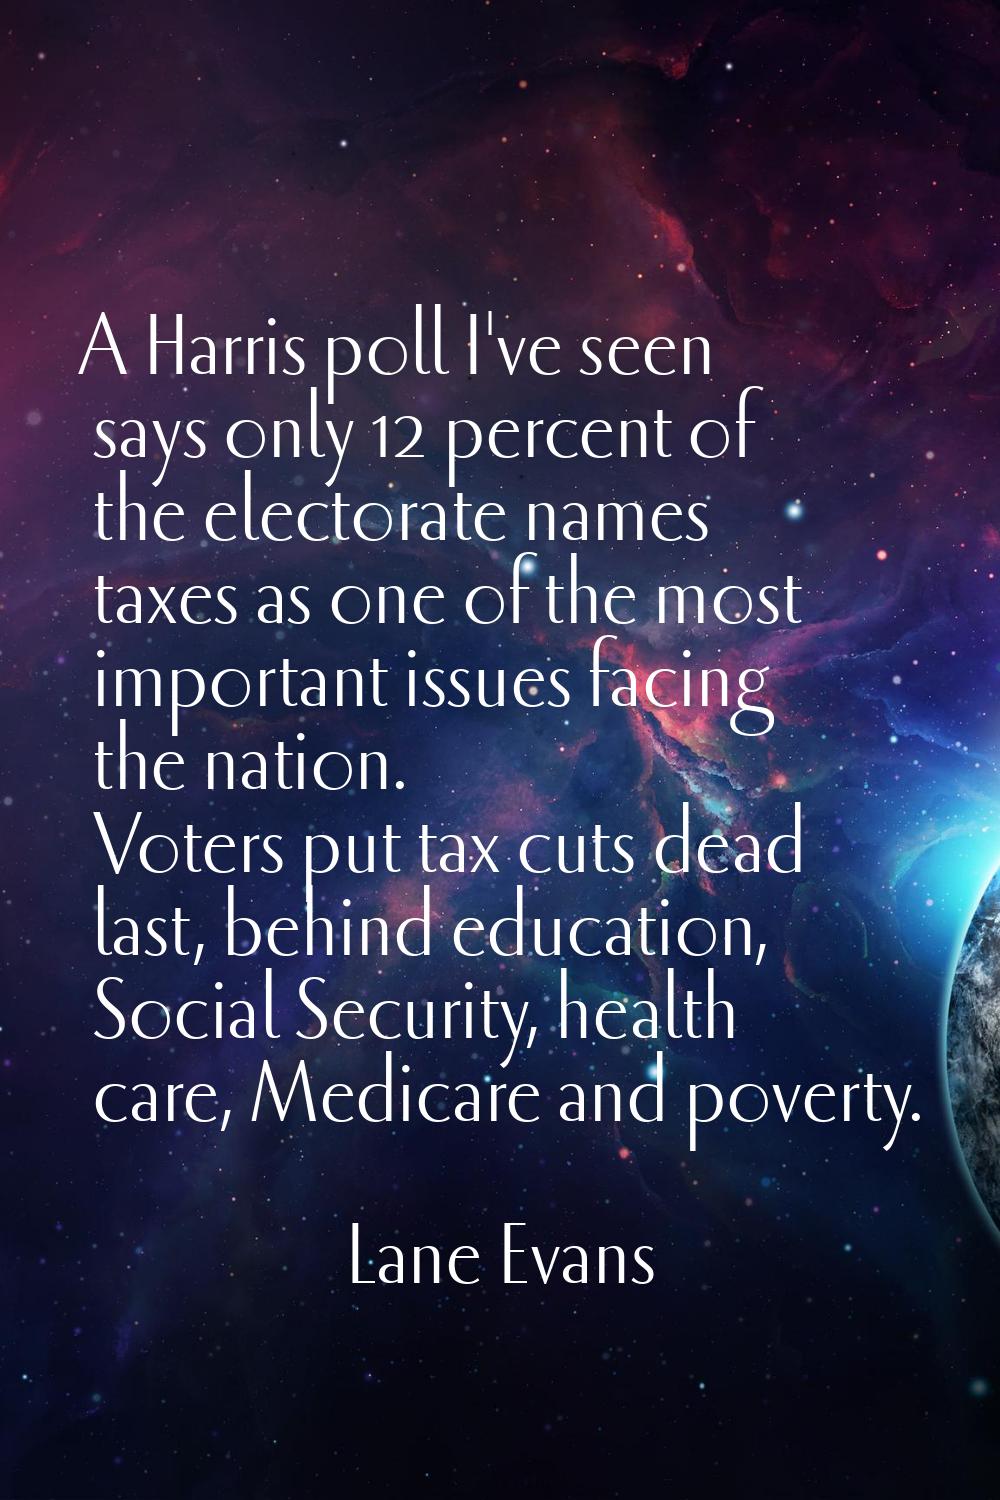 A Harris poll I've seen says only 12 percent of the electorate names taxes as one of the most impor